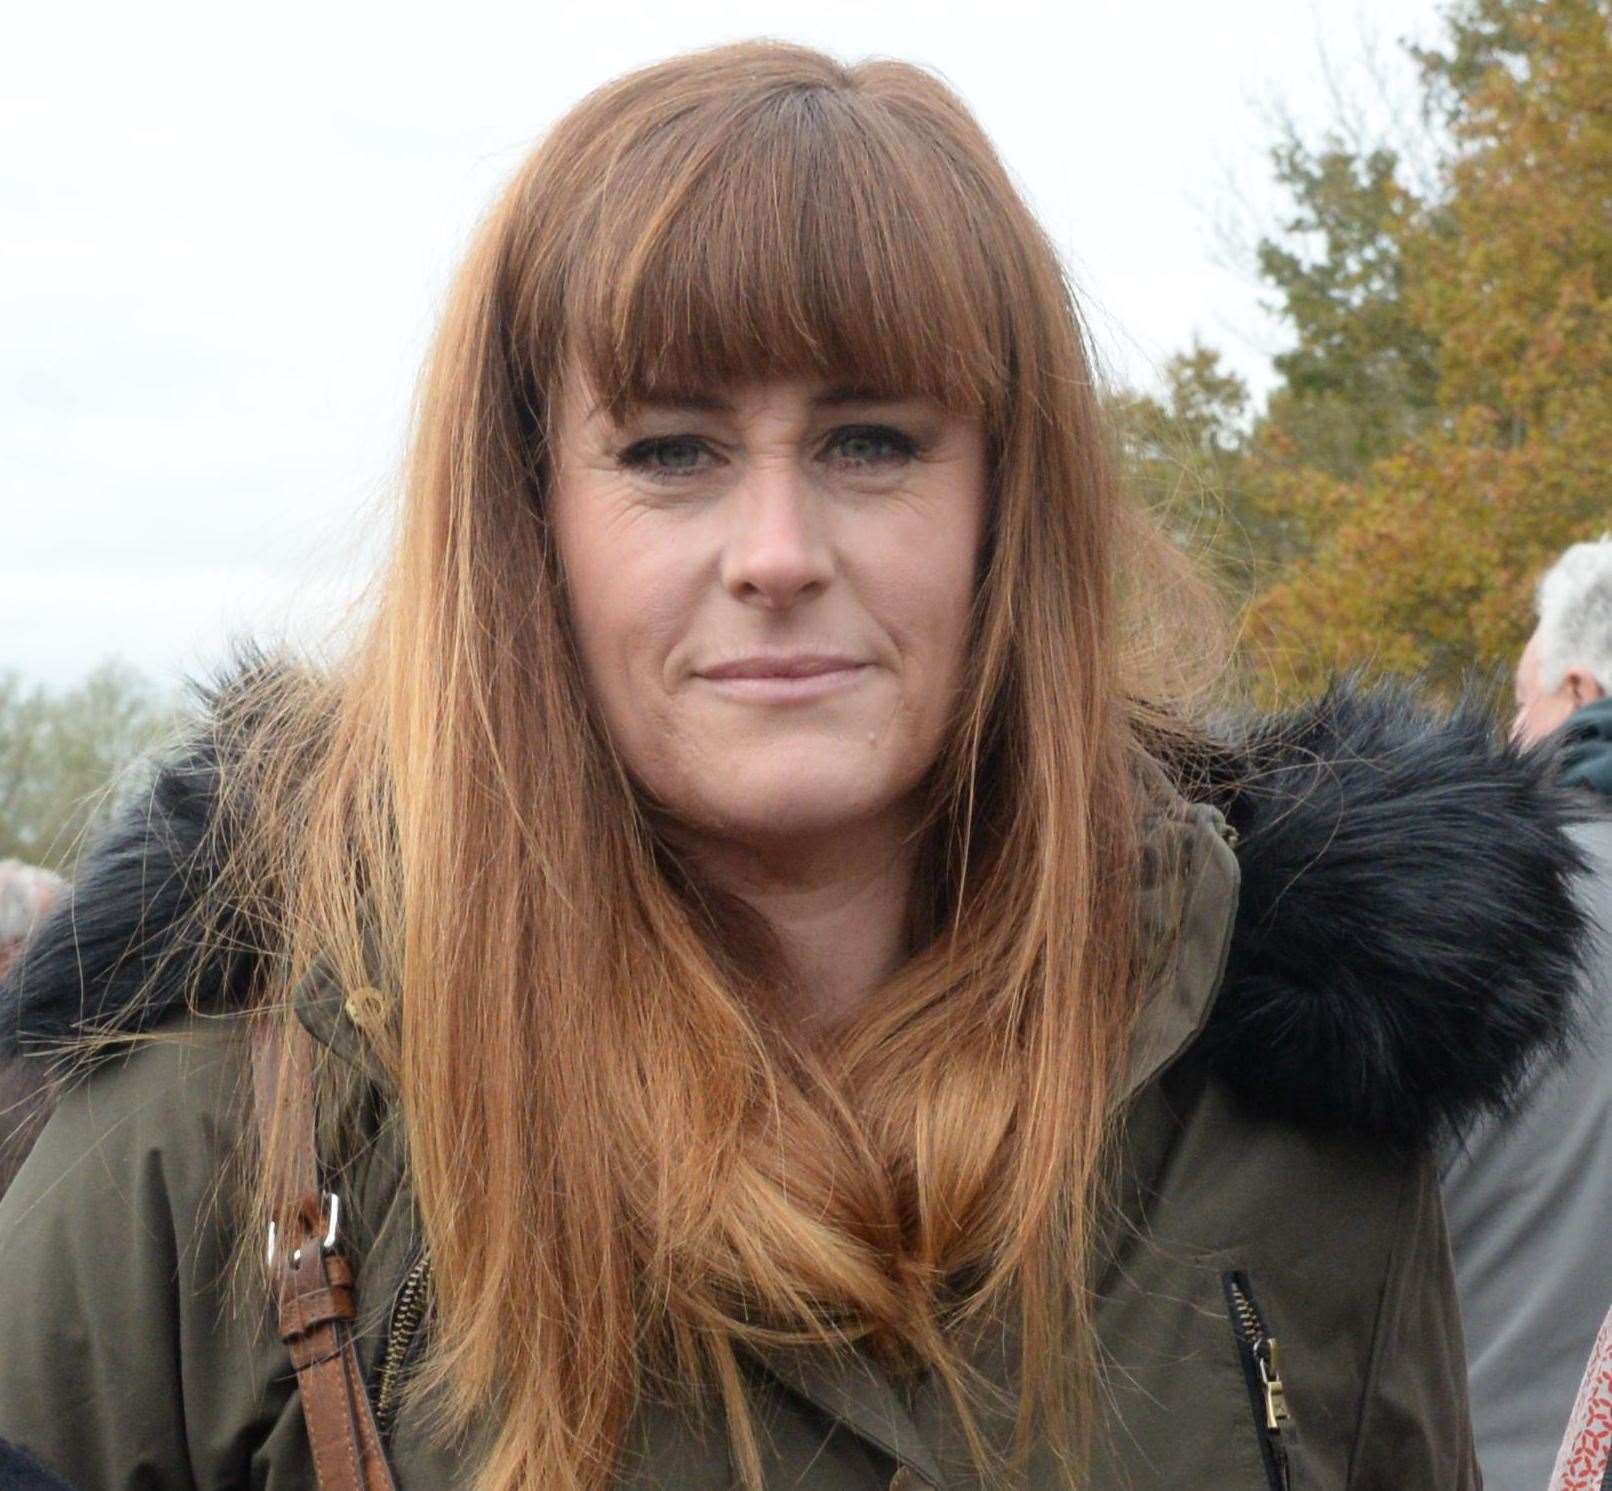 Kelly Tolhurst said progress is being made quickly on the vaccine roll out across Medway